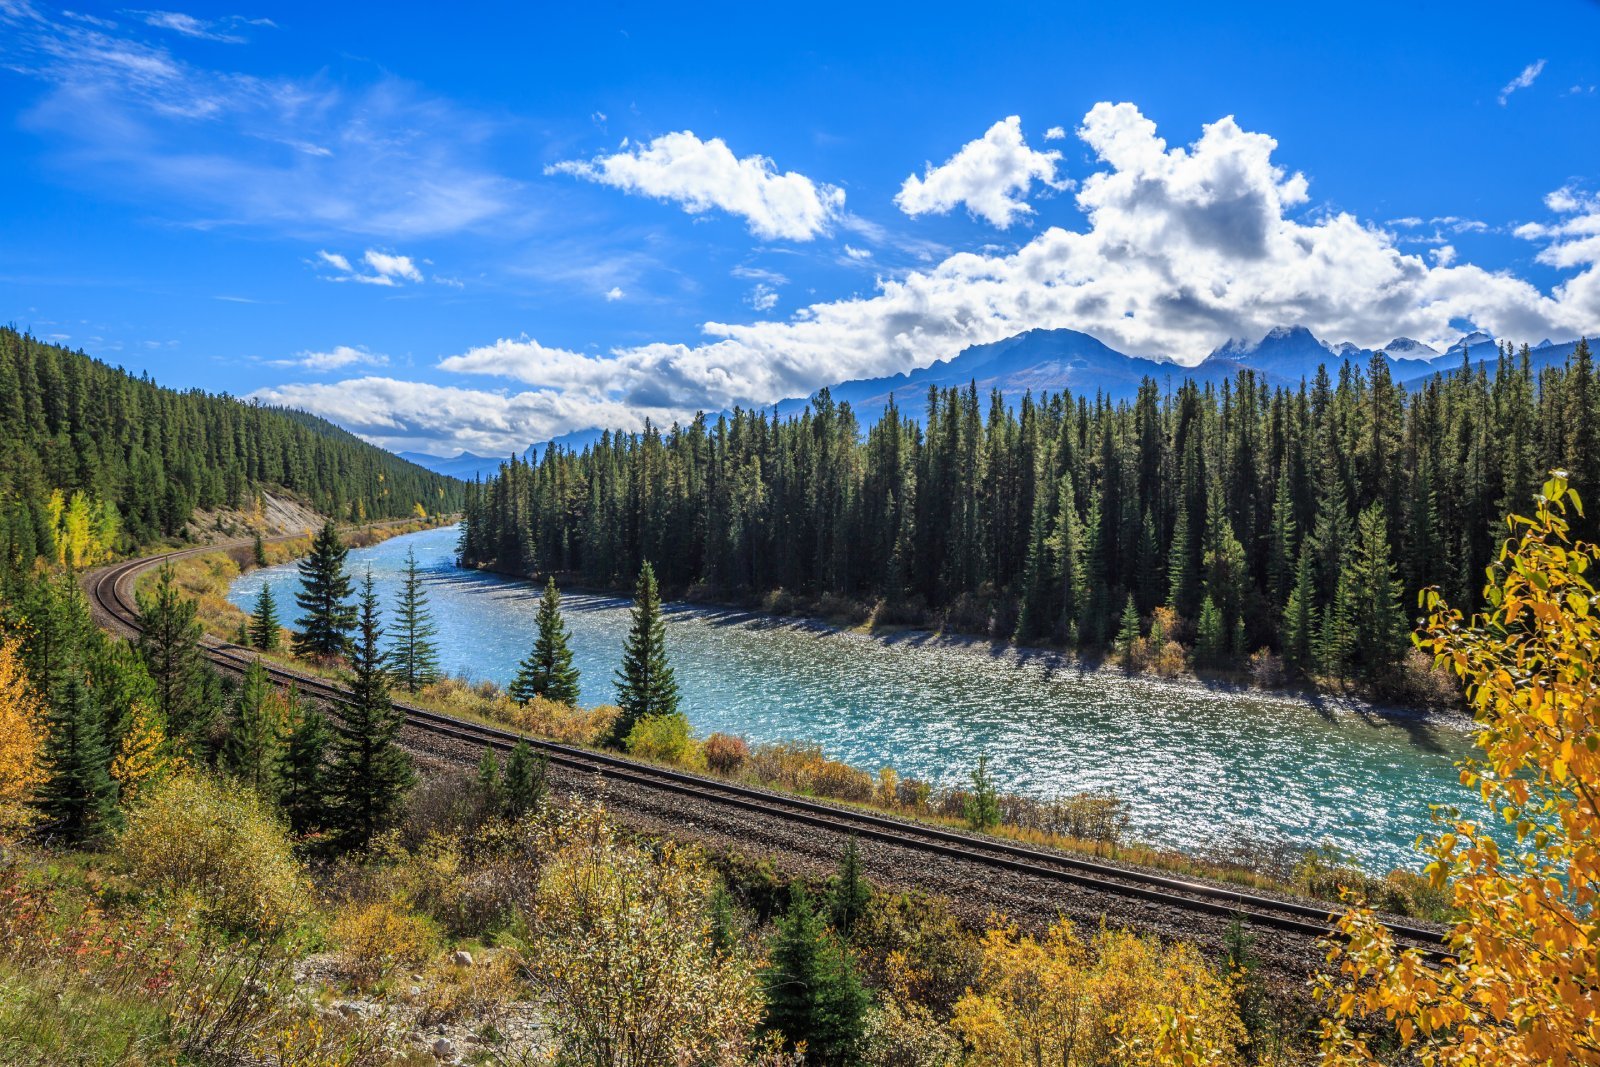 <p class="wp-caption-text">Image Credit: Shutterstock / Stas Moroz</p>  <p><span>The Bow Valley Parkway is a scenic alternative route between Banff and Lake Louise, offering a slower pace and the chance to enjoy the natural beauty of Banff National Park away from the crowds of the Trans-Canada Highway. This picturesque drive meanders through forests and along the Bow River, with numerous pullouts, picnic areas, and short trails that invite exploration.</span></p>